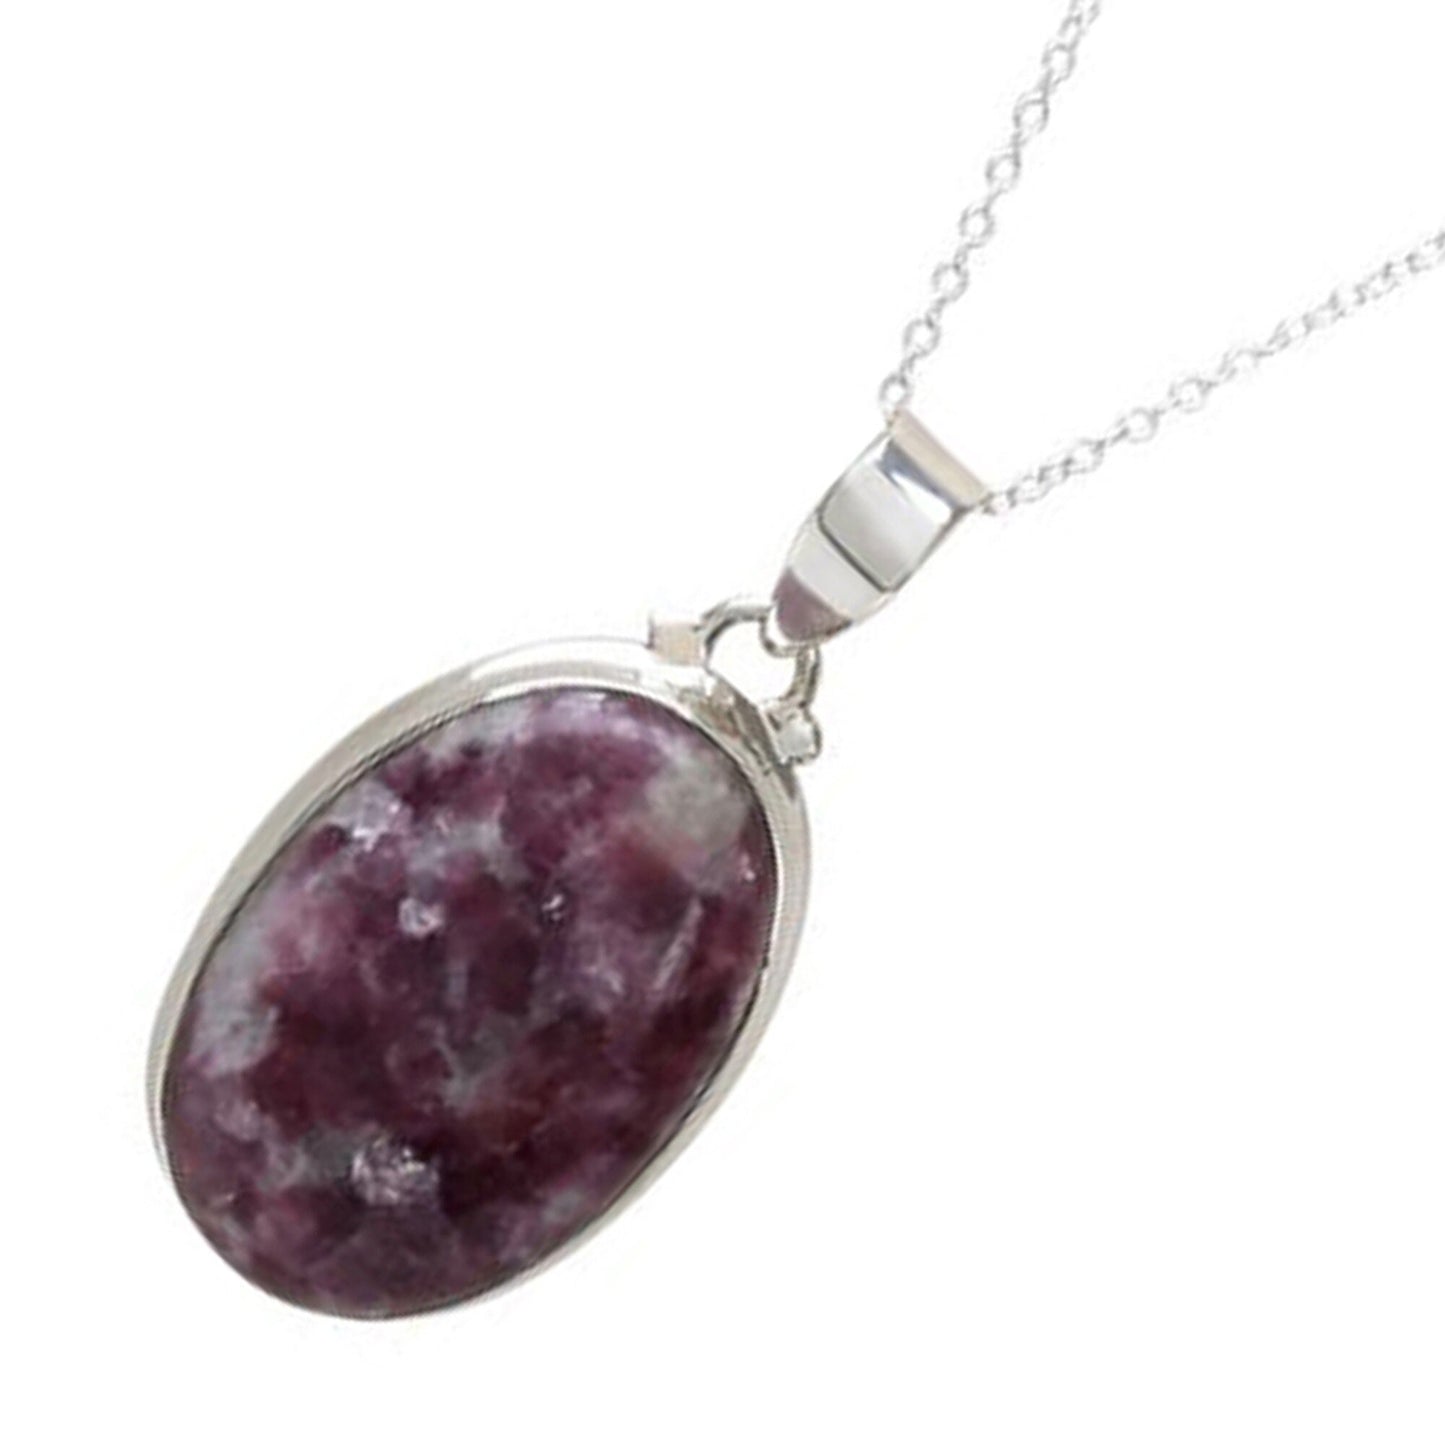 Lepidolite Gemstone Pendant, 925 Sterling Silver Pendant Boho Pendant For Women, Pendant With 18 Inches Chain, Fine Jewelry, Gift For Her